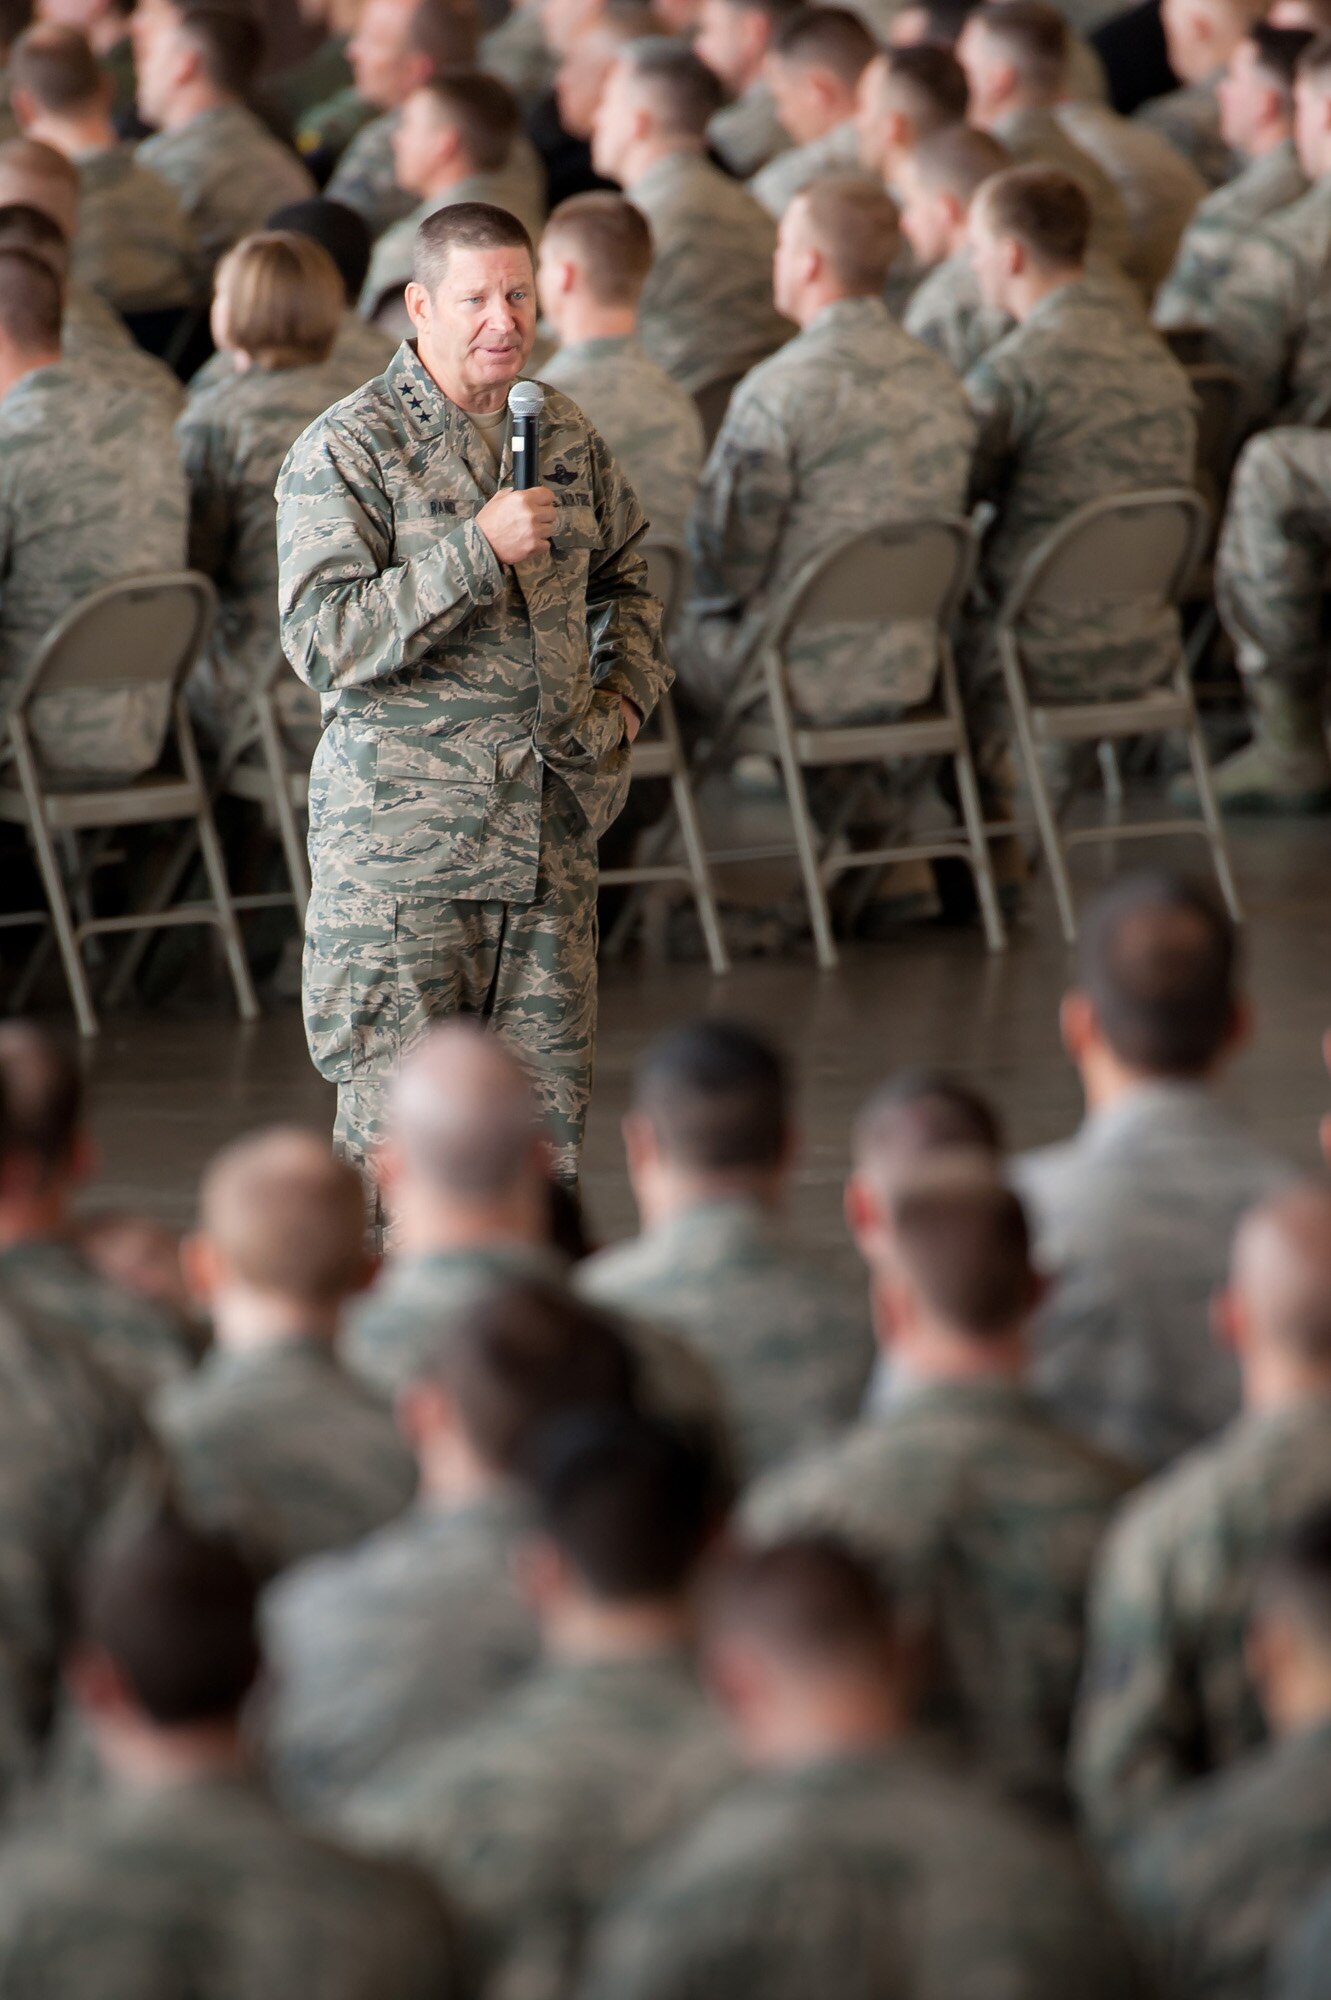 Lt. Gen. Robin Rand, 12th Air Force commander, speaks with Airmen from the 28th Bomb Wing at Ellsworth Air Force Base, S.D. April 5, 2013. Lt. Gen. Rand discussed a wide range of topics during his commander's call including the importance of standards, heritage and the wingman concept. (U.S. Air Force photo by Tech. Sgt. Nathan Gallahan/Released)